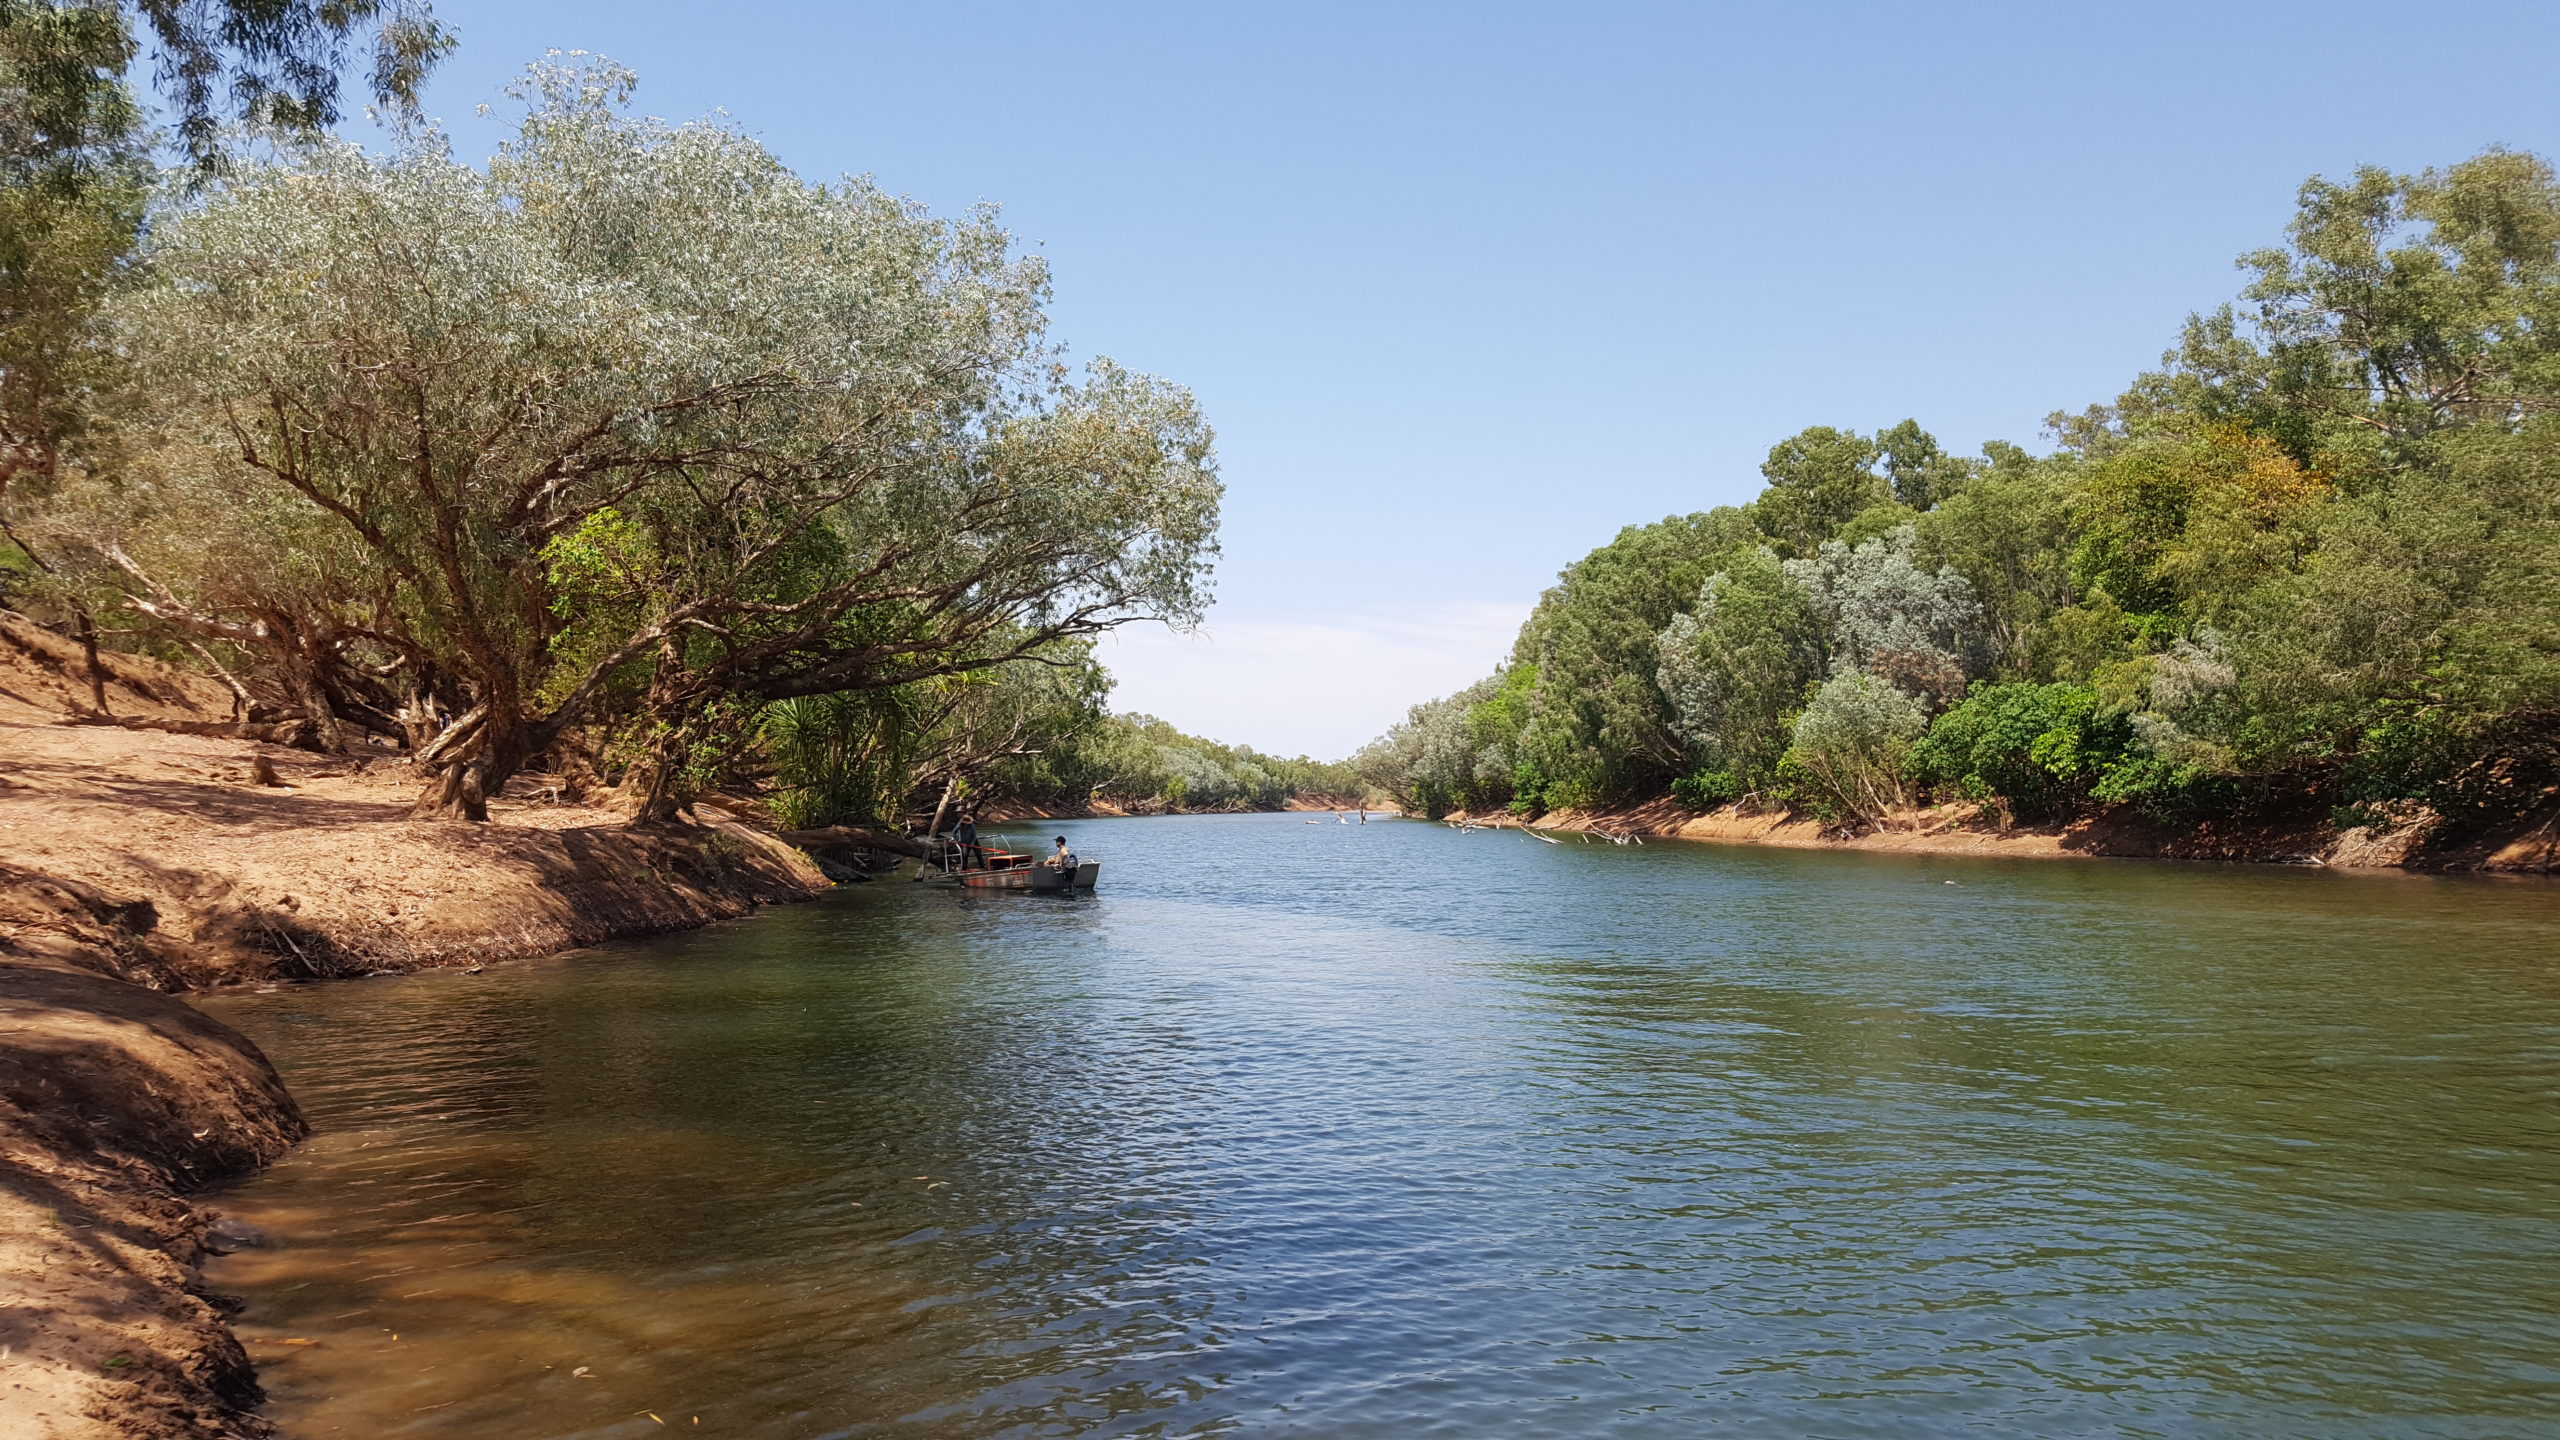 Fitzroy river from ther riverbank